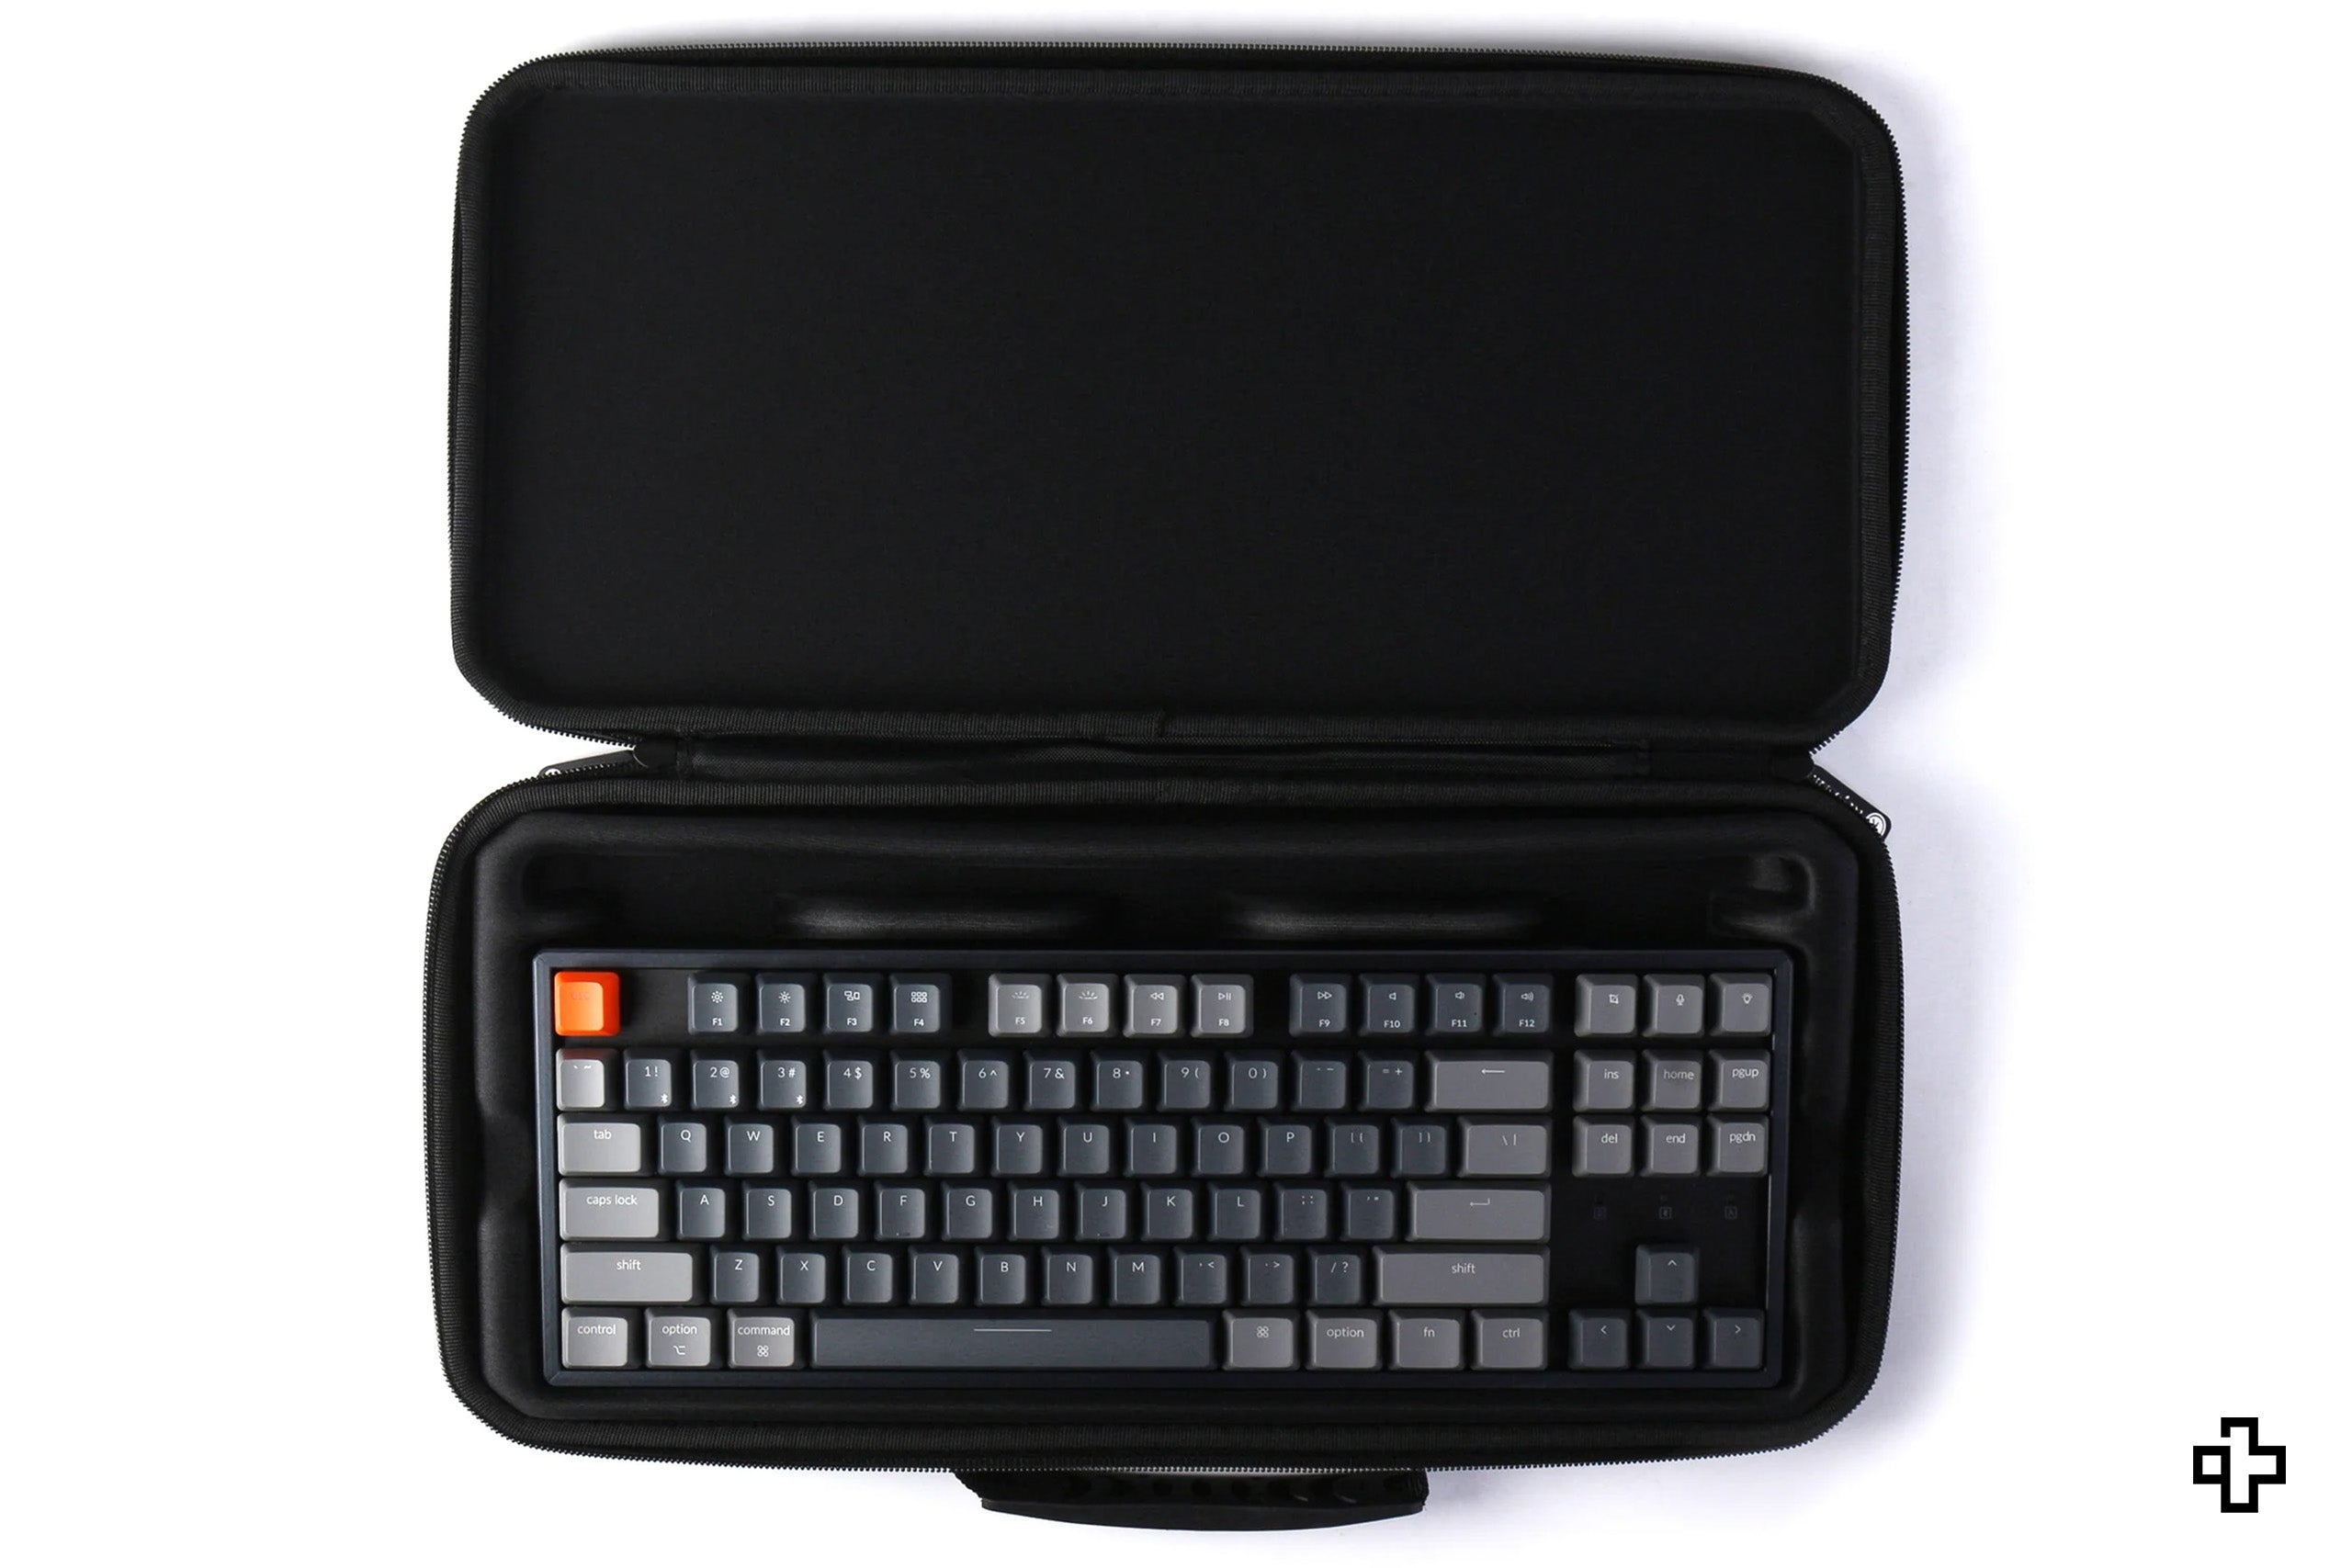 Cases for the Keychron keyboard